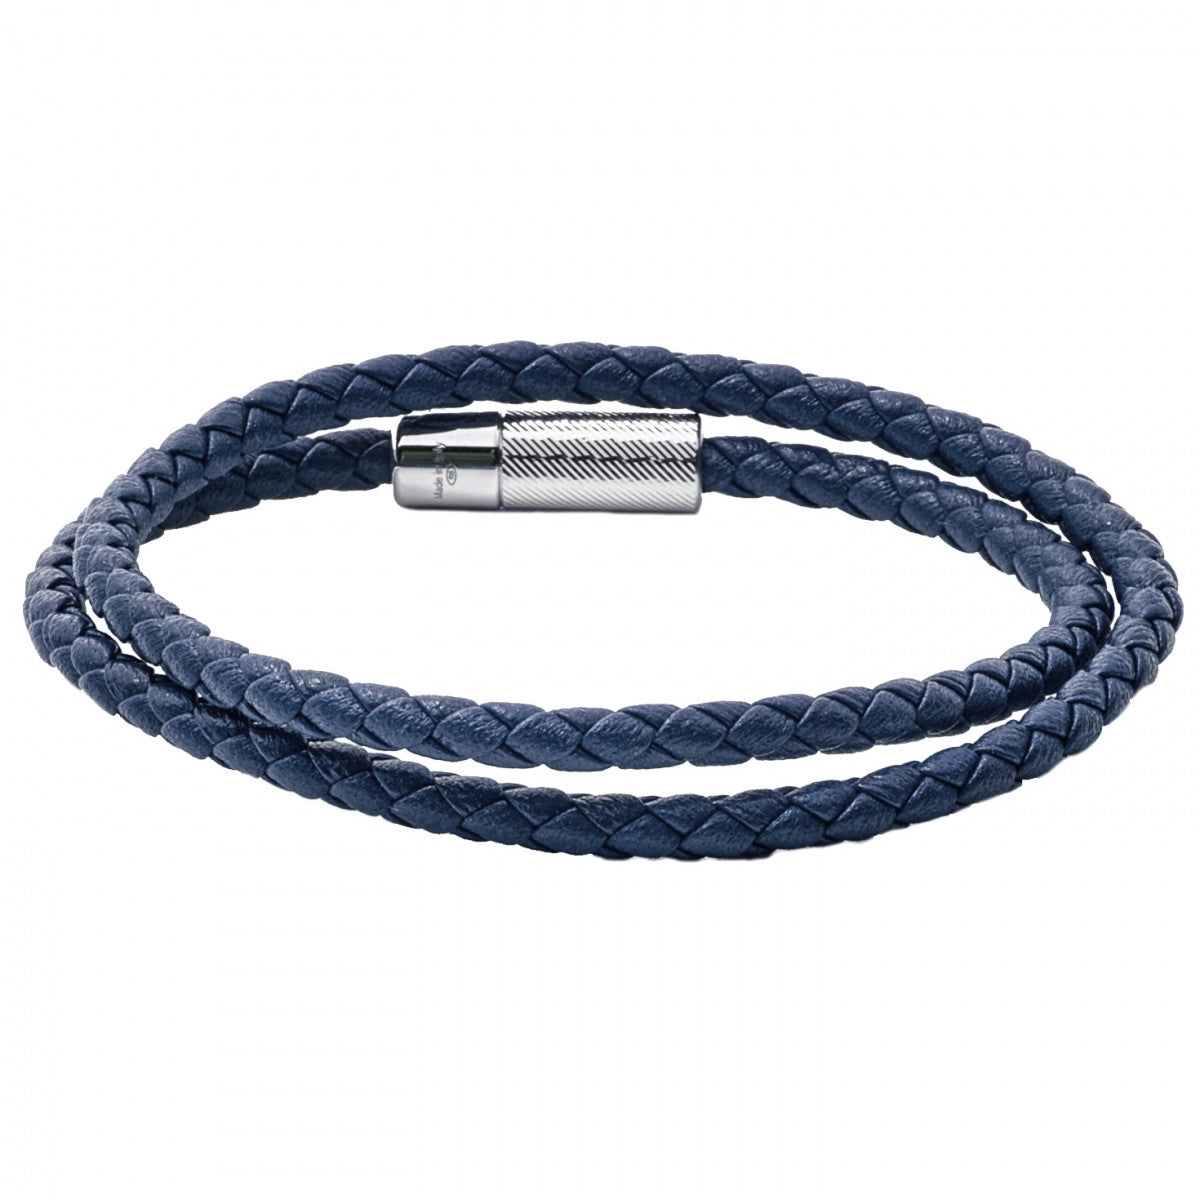 Tateossian POP Rigato Braided Leather Wrap Bracelet with Sterling Silver Cylindrical Pop Tube Clasp, Navy